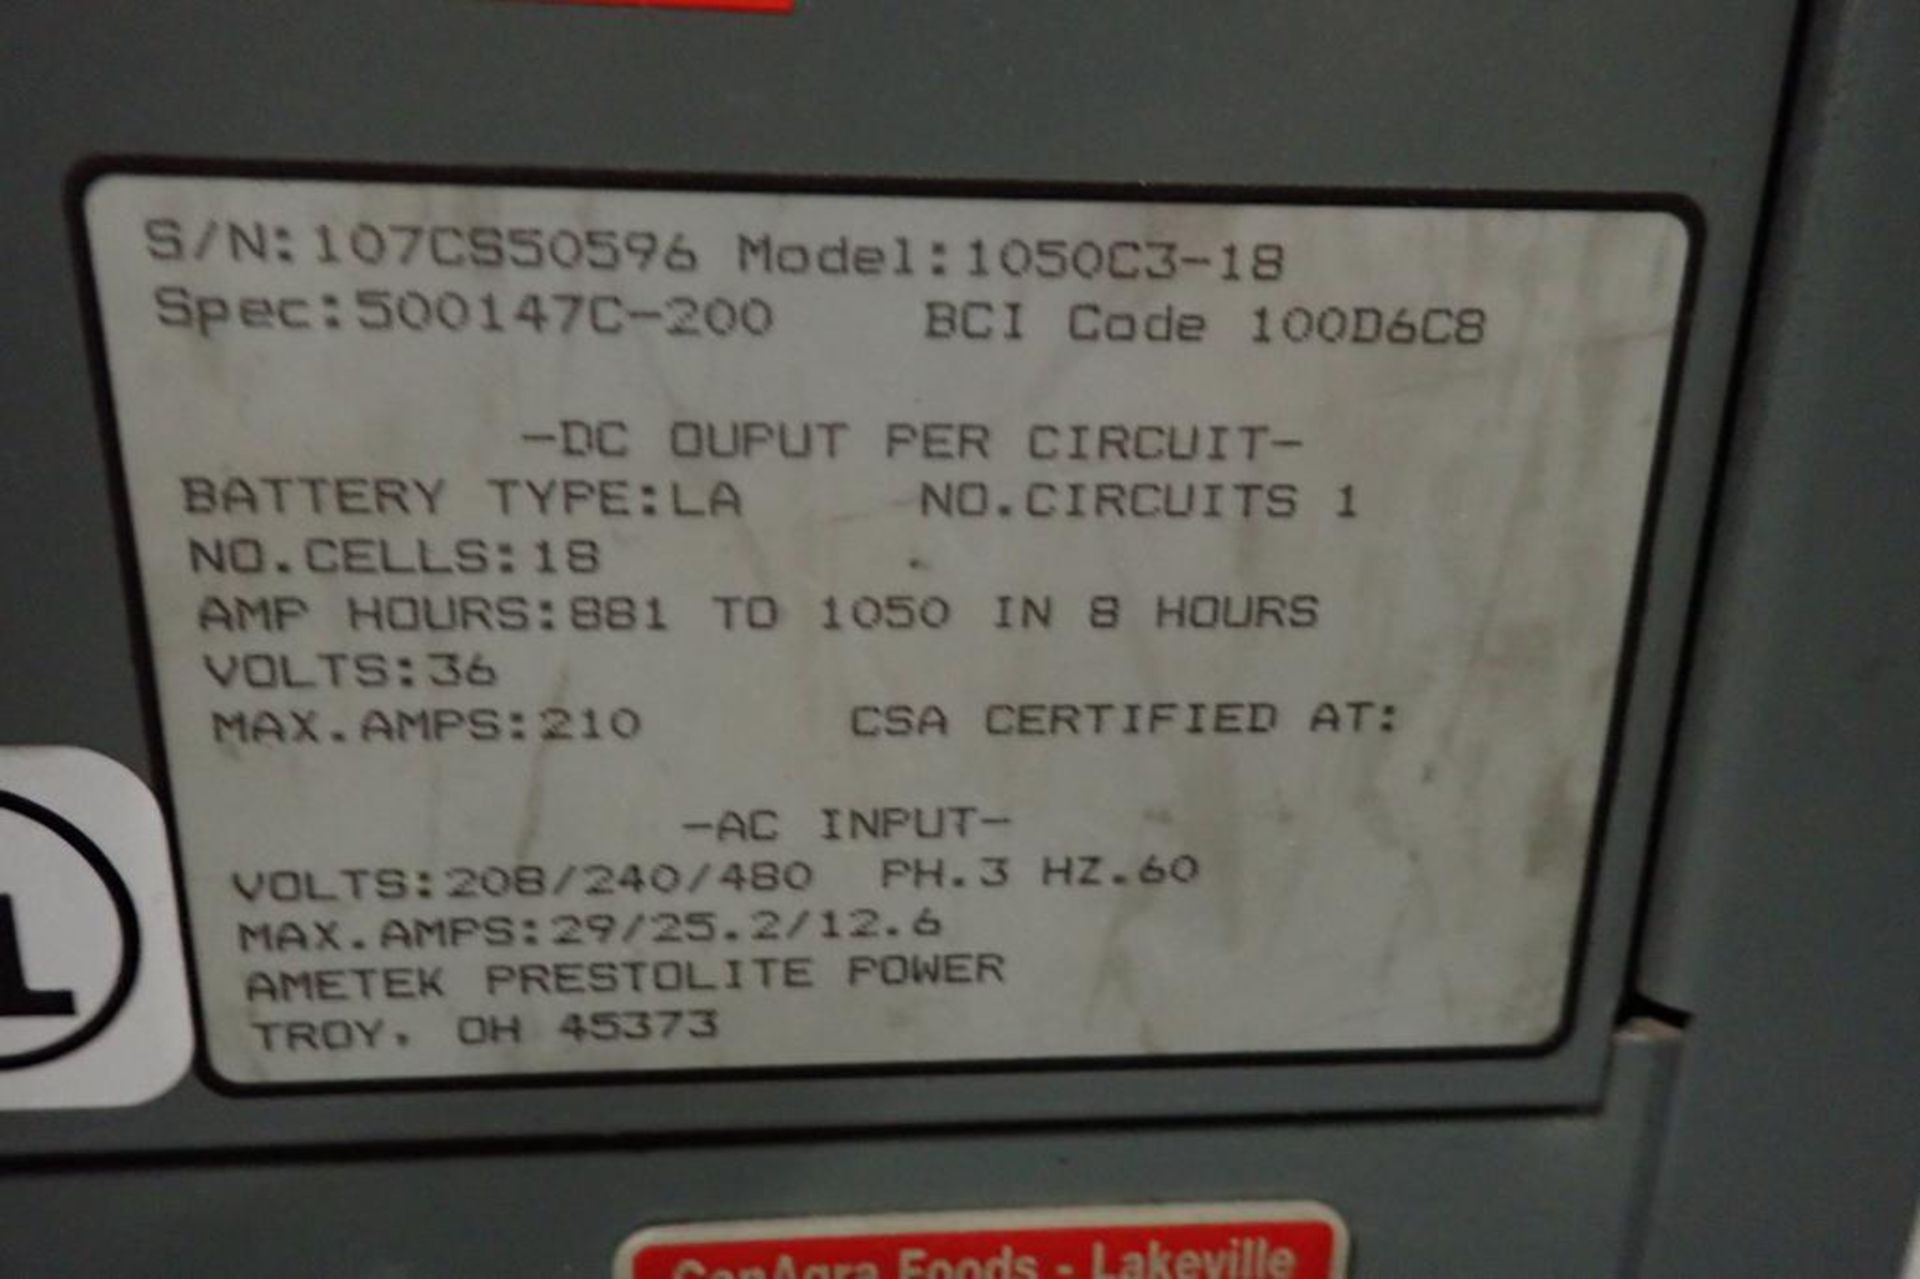 Accu-Charger 36 volt battery charger 596-4, Model 1050C3-18, SN 107CS50596, 18 cells, 208/240/480V, - Image 3 of 4